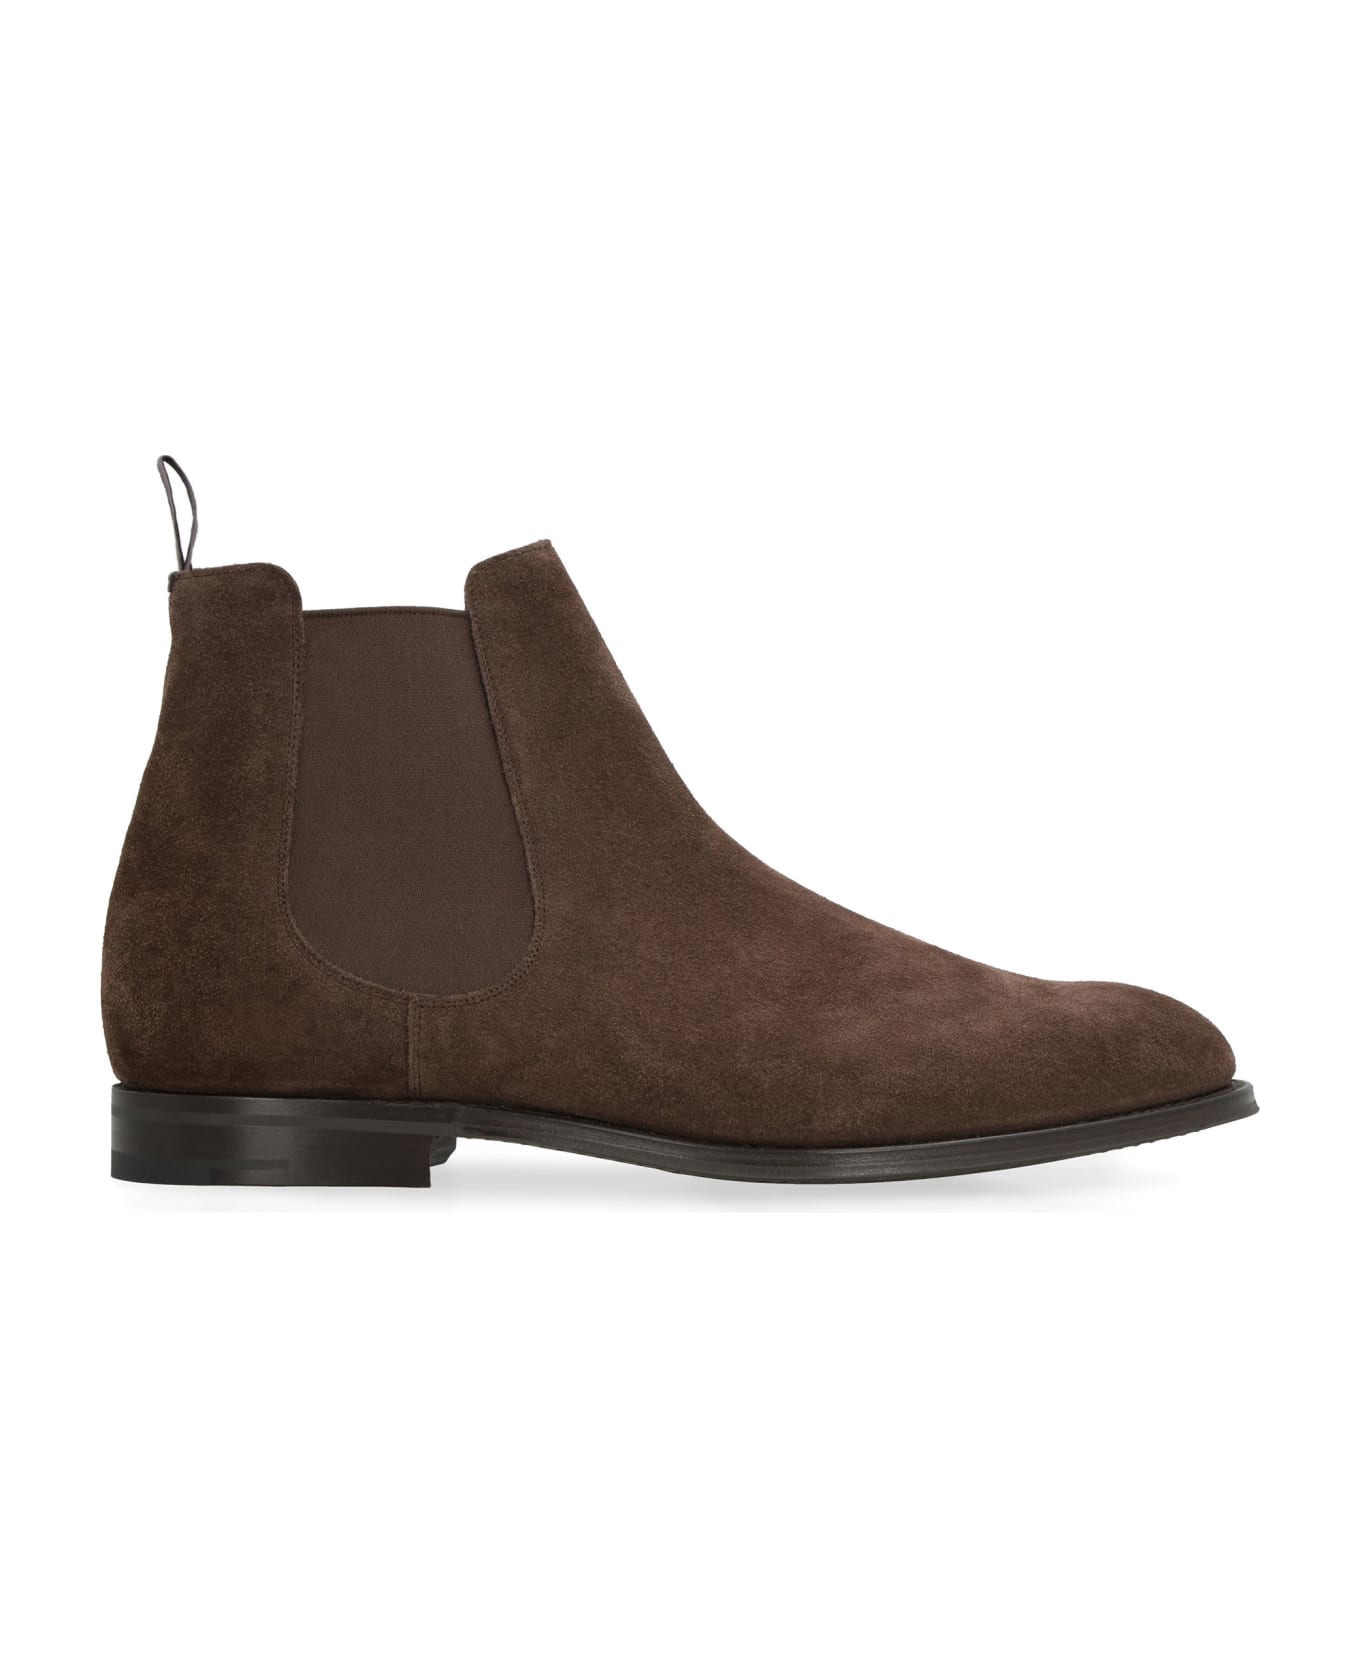 Church's Suede Chelsea Boots - brown ブーツ